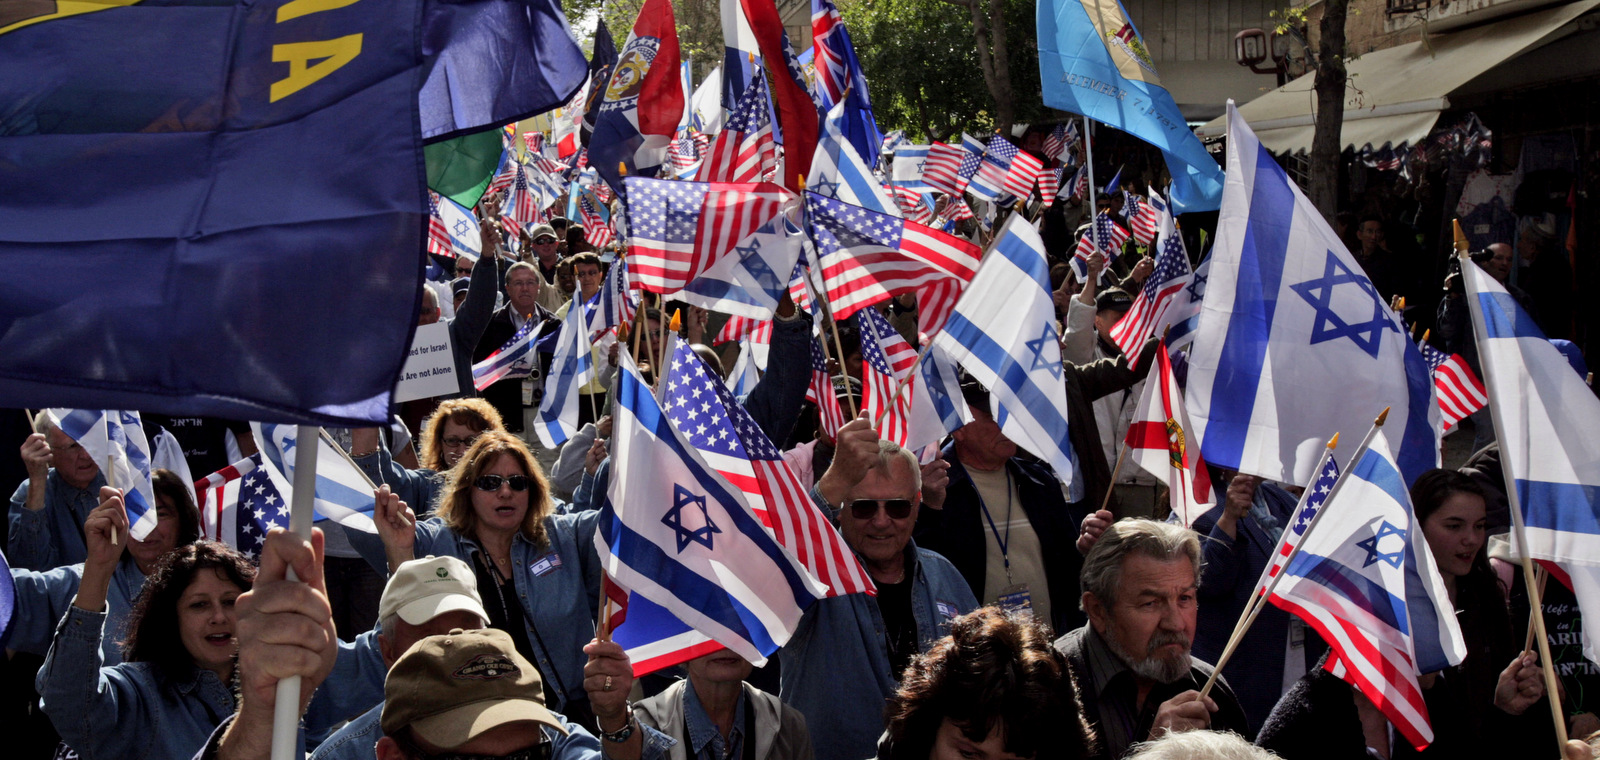 Evangelical Christians supporters of Israel hold US and Israeli flags as they march through Jerusalem. US Evangelist John Hagee, a Christian Zionist brought hundreds of backers on a solidarity trip to Israel, April 7, 2008. (AP/Peter Dejong)